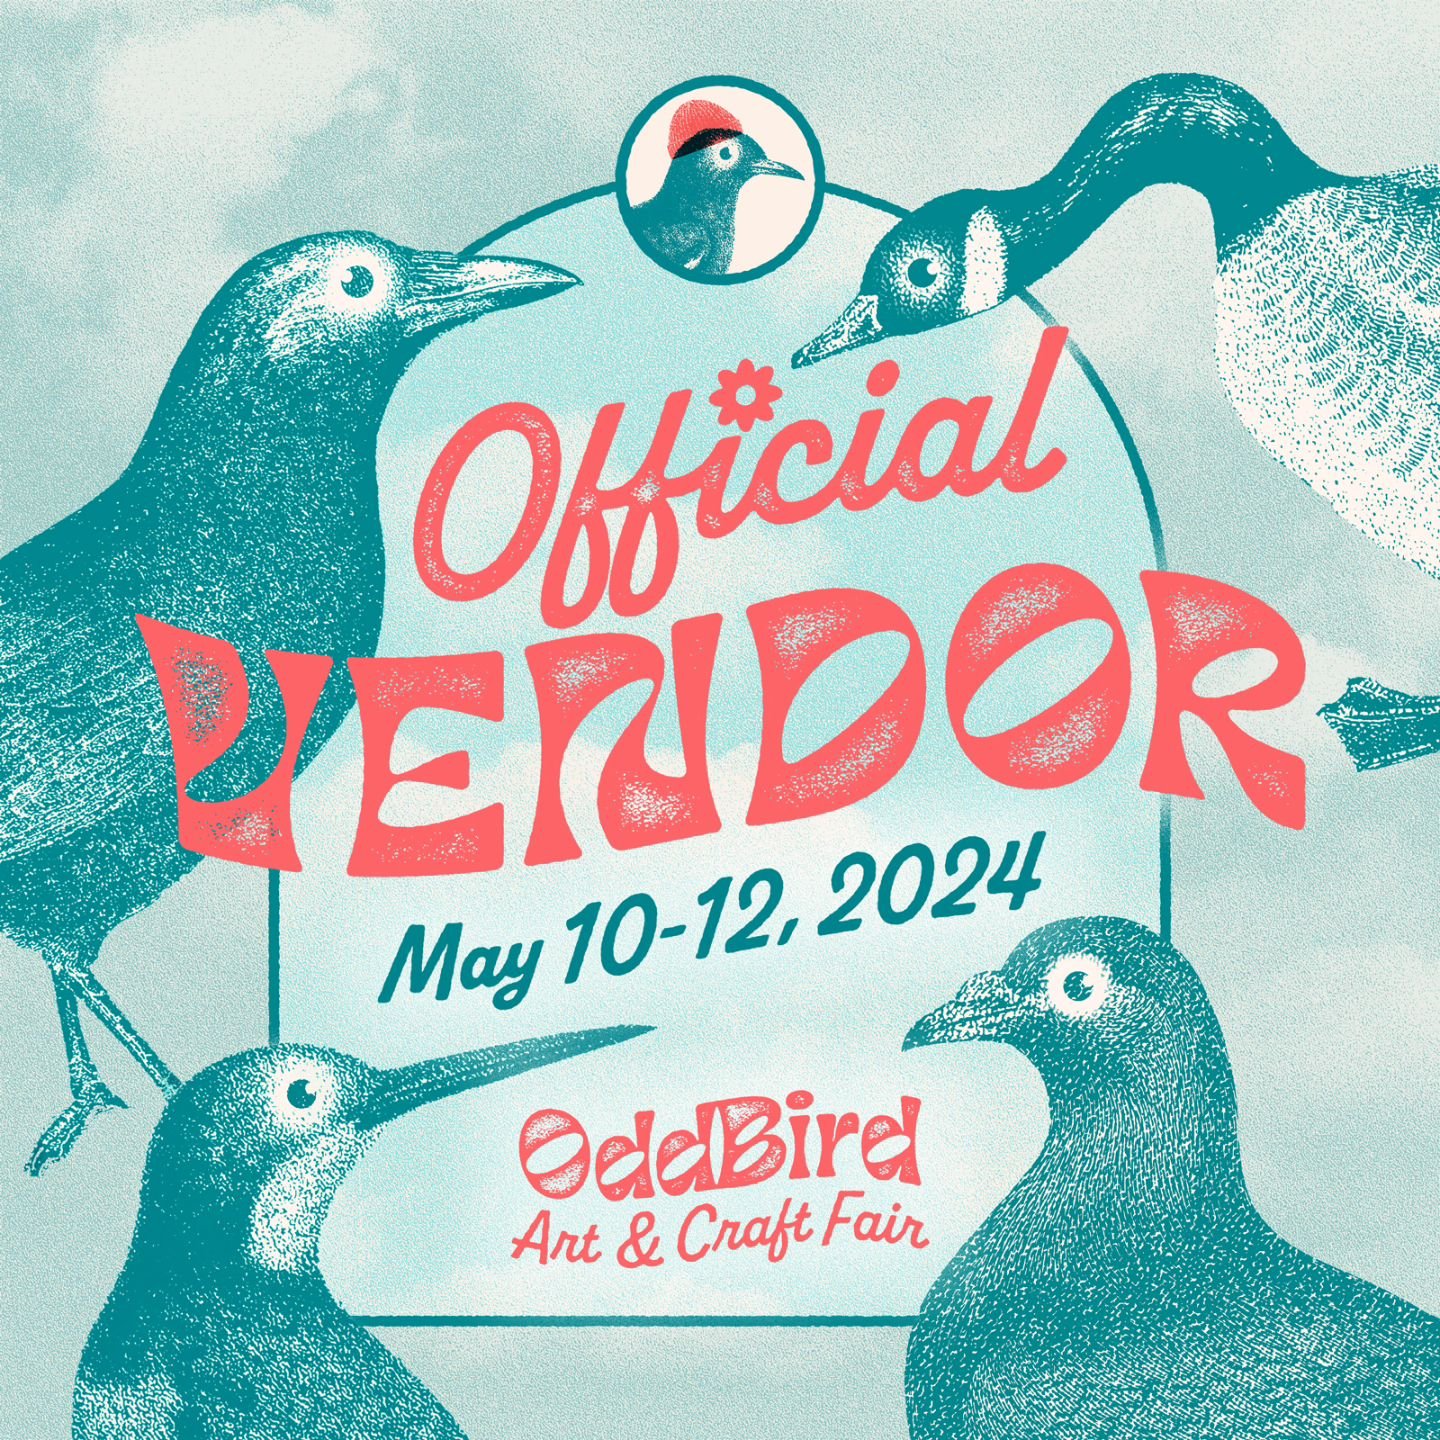 We're excited to be a part of the first spring @oddbirdfair from May 10 to 12, 2024! We'lk be bringing our new designs for spring! See you soon Edmonton! 
#yeg #oddbirdfair #spring #whyteave #art